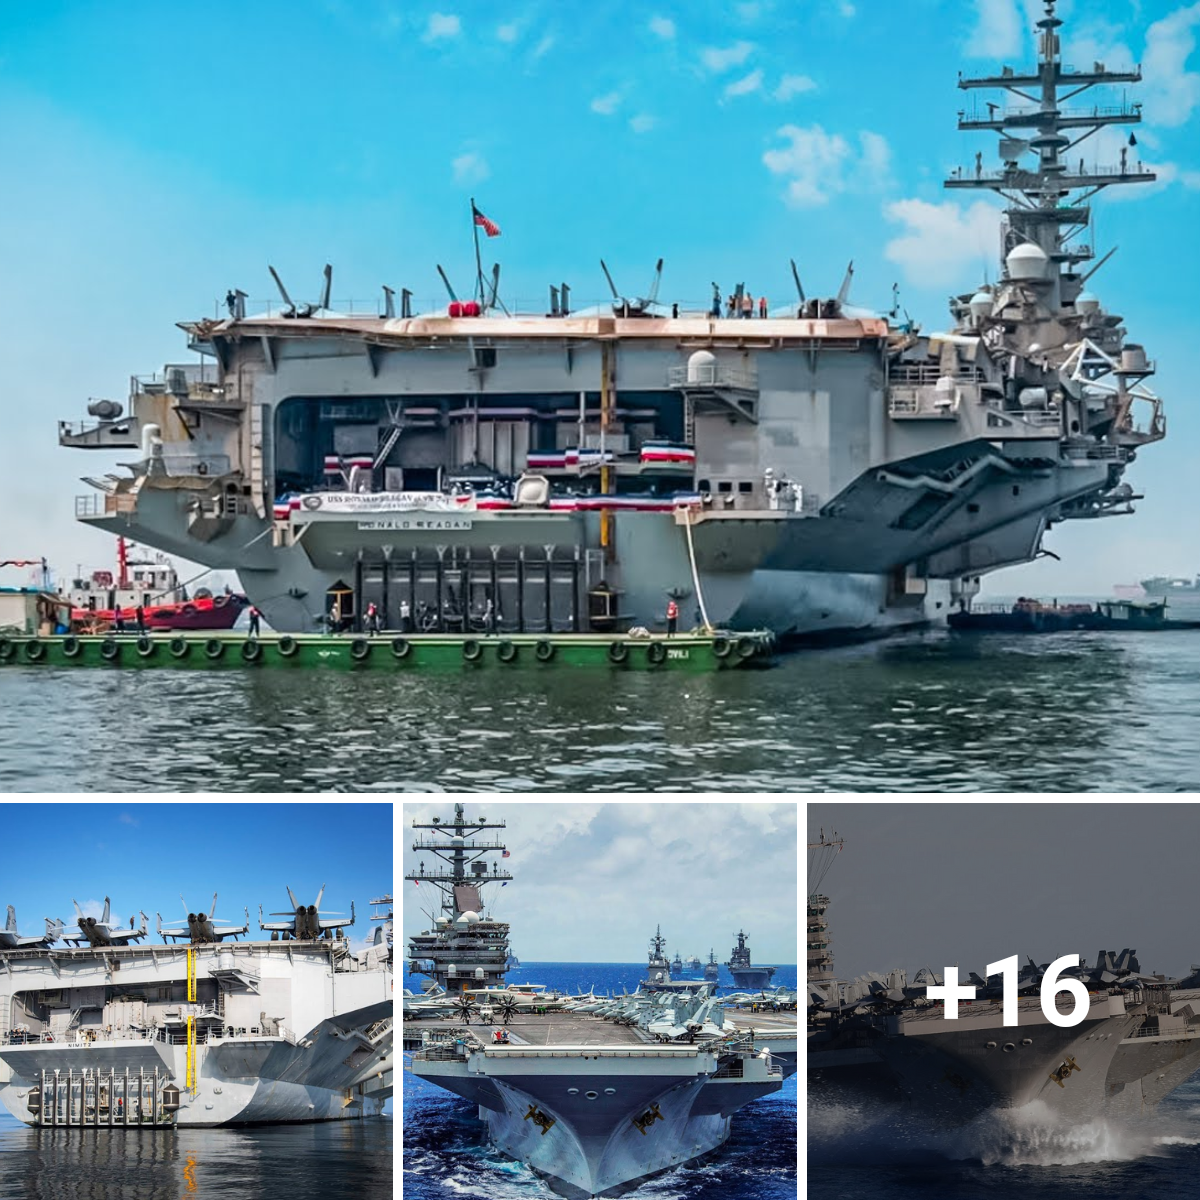 Discover A Marvel of the Seas, the World’s Largest $13 Billion Aircraft Carrier